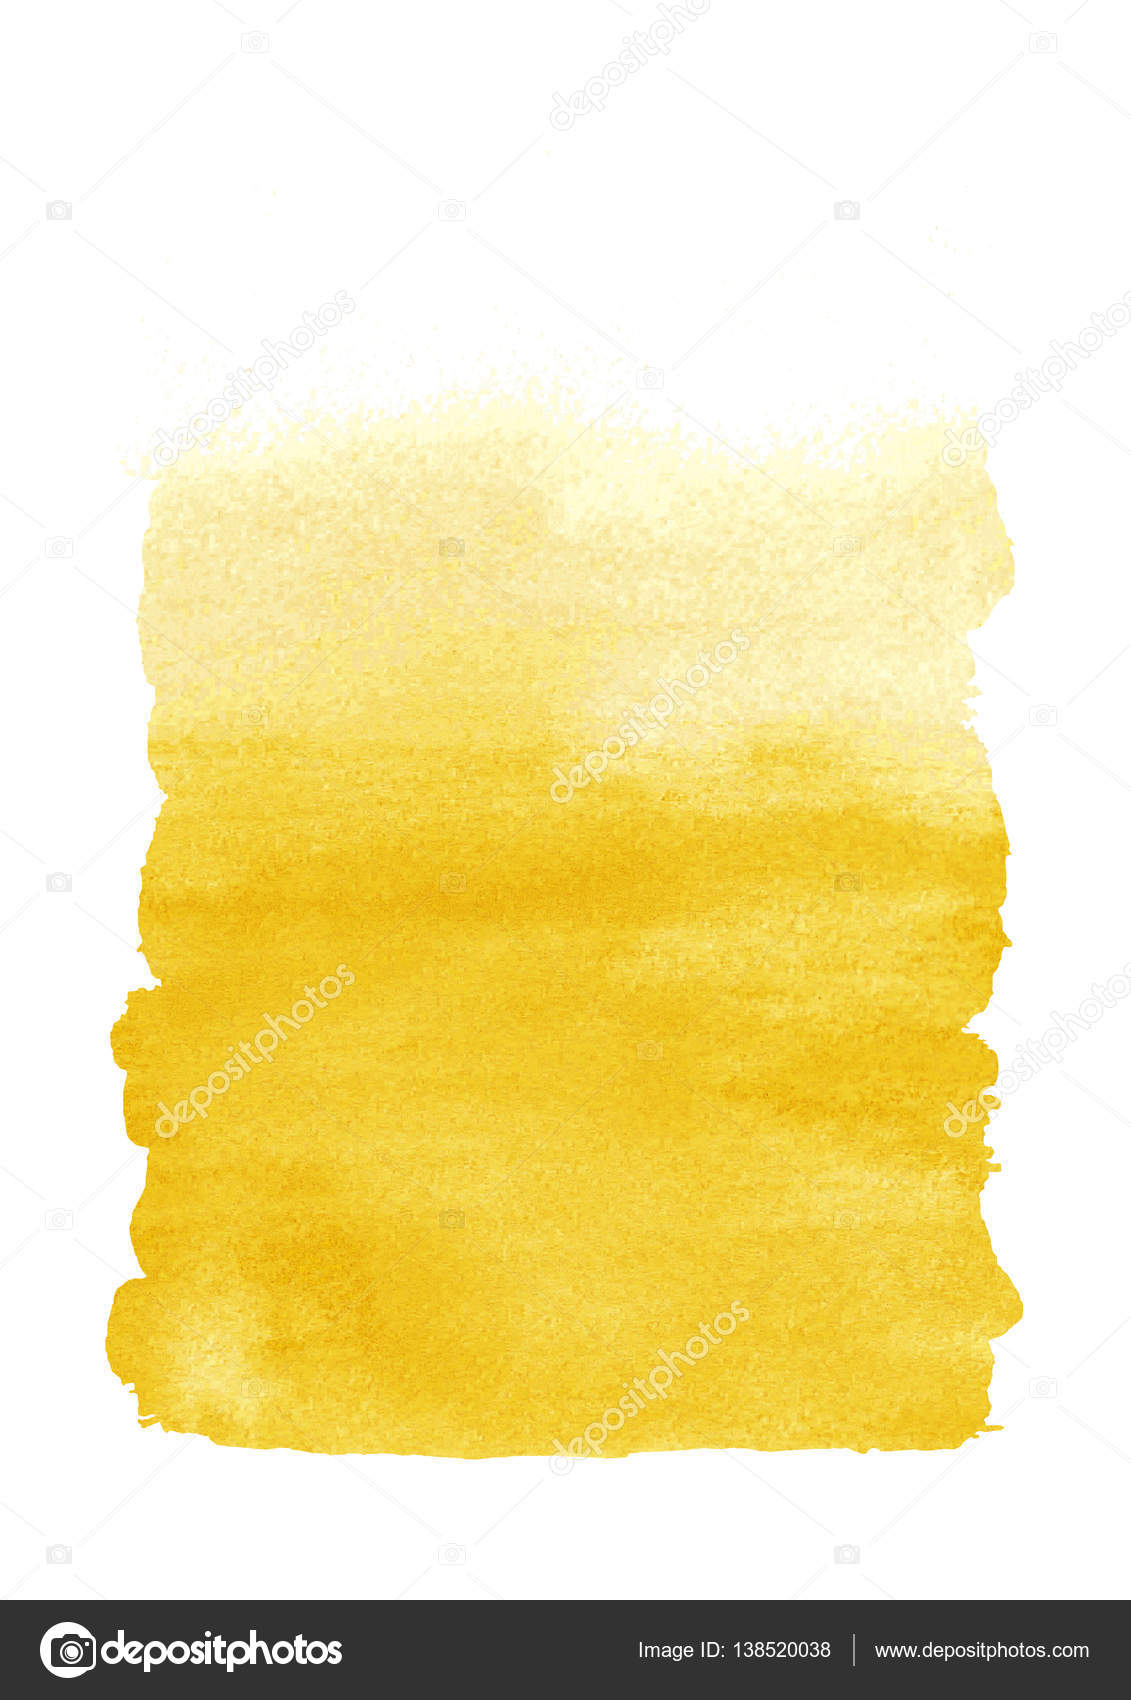 Yellow Watercolor Iphone Background - HD Wallpaper 